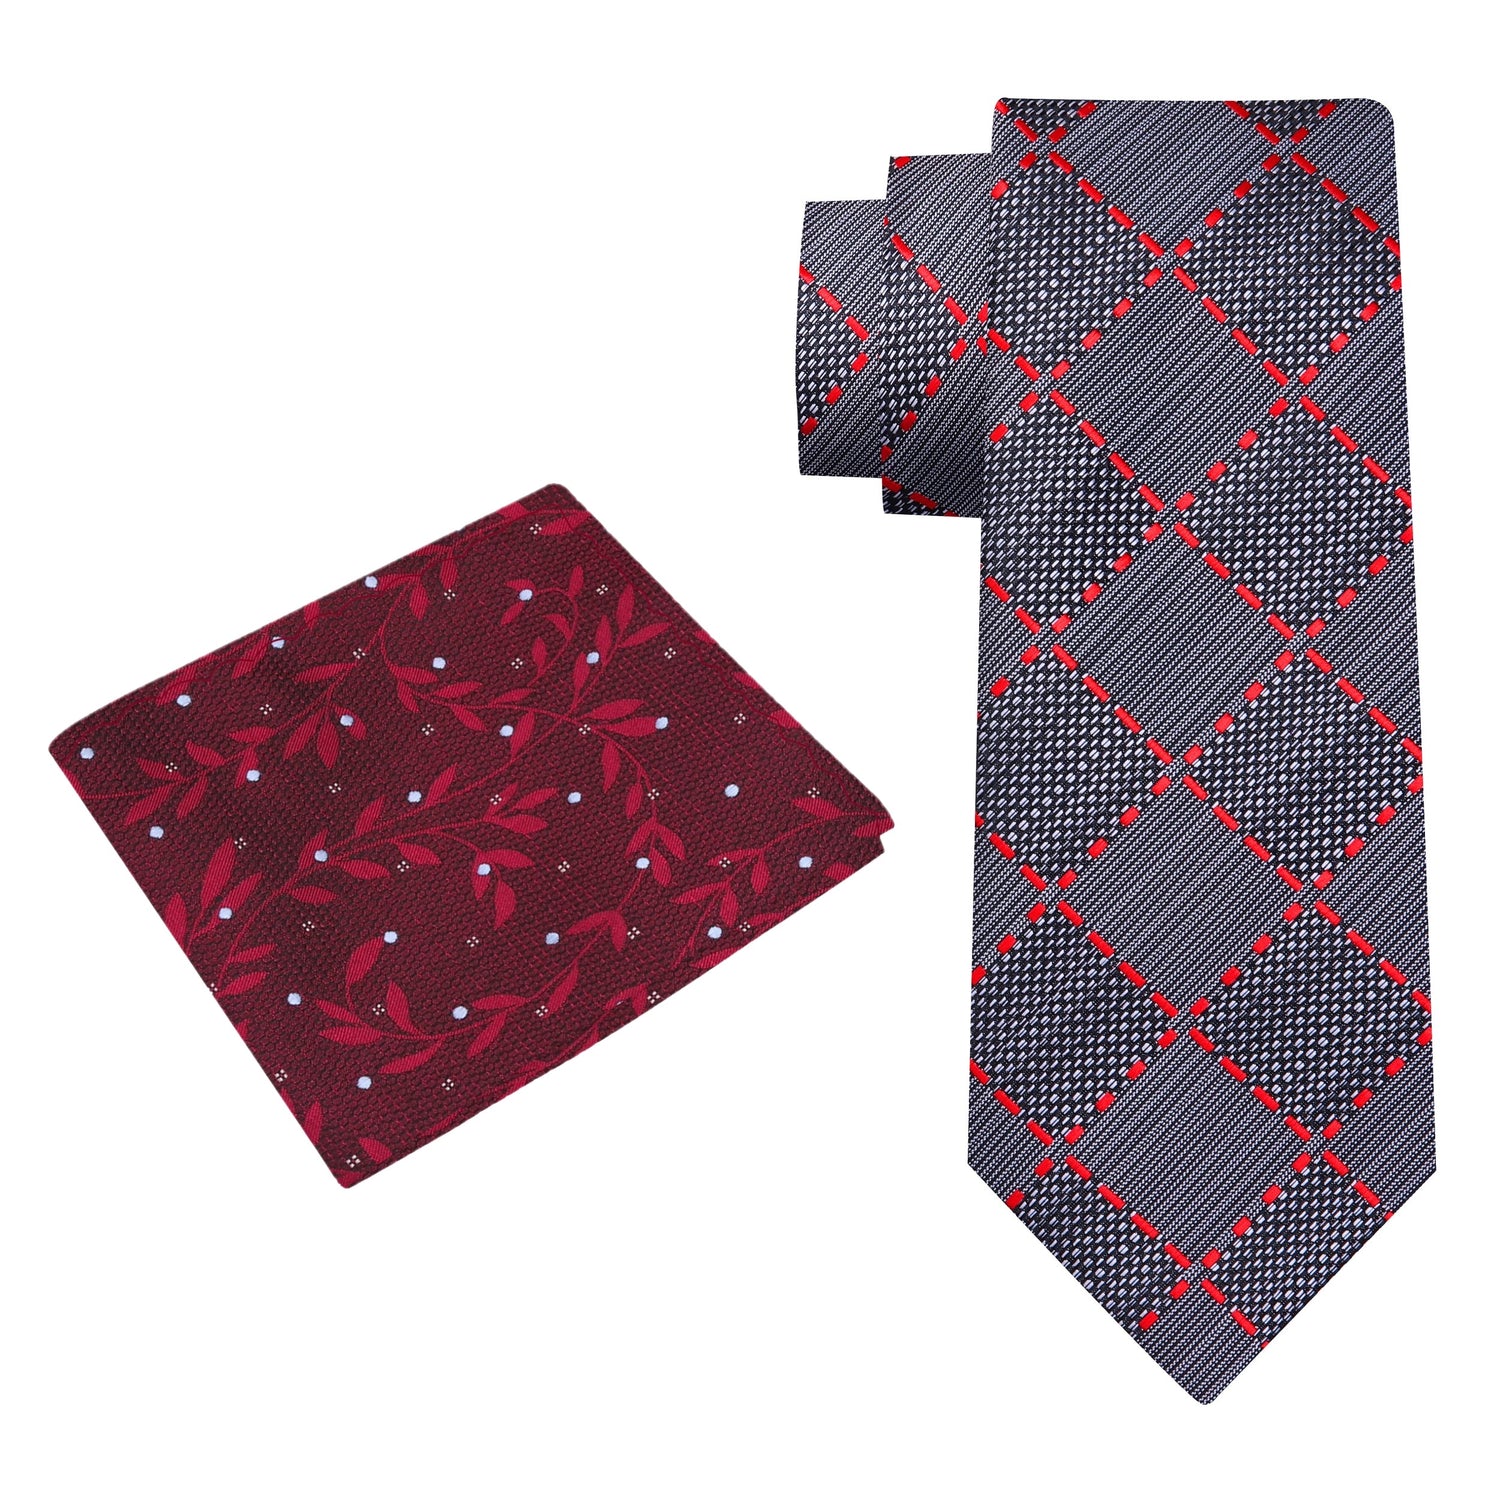 Alt View: Grey, Red and Black Plaid/Abstract Tie and Accenting Red Floral Pocket Square